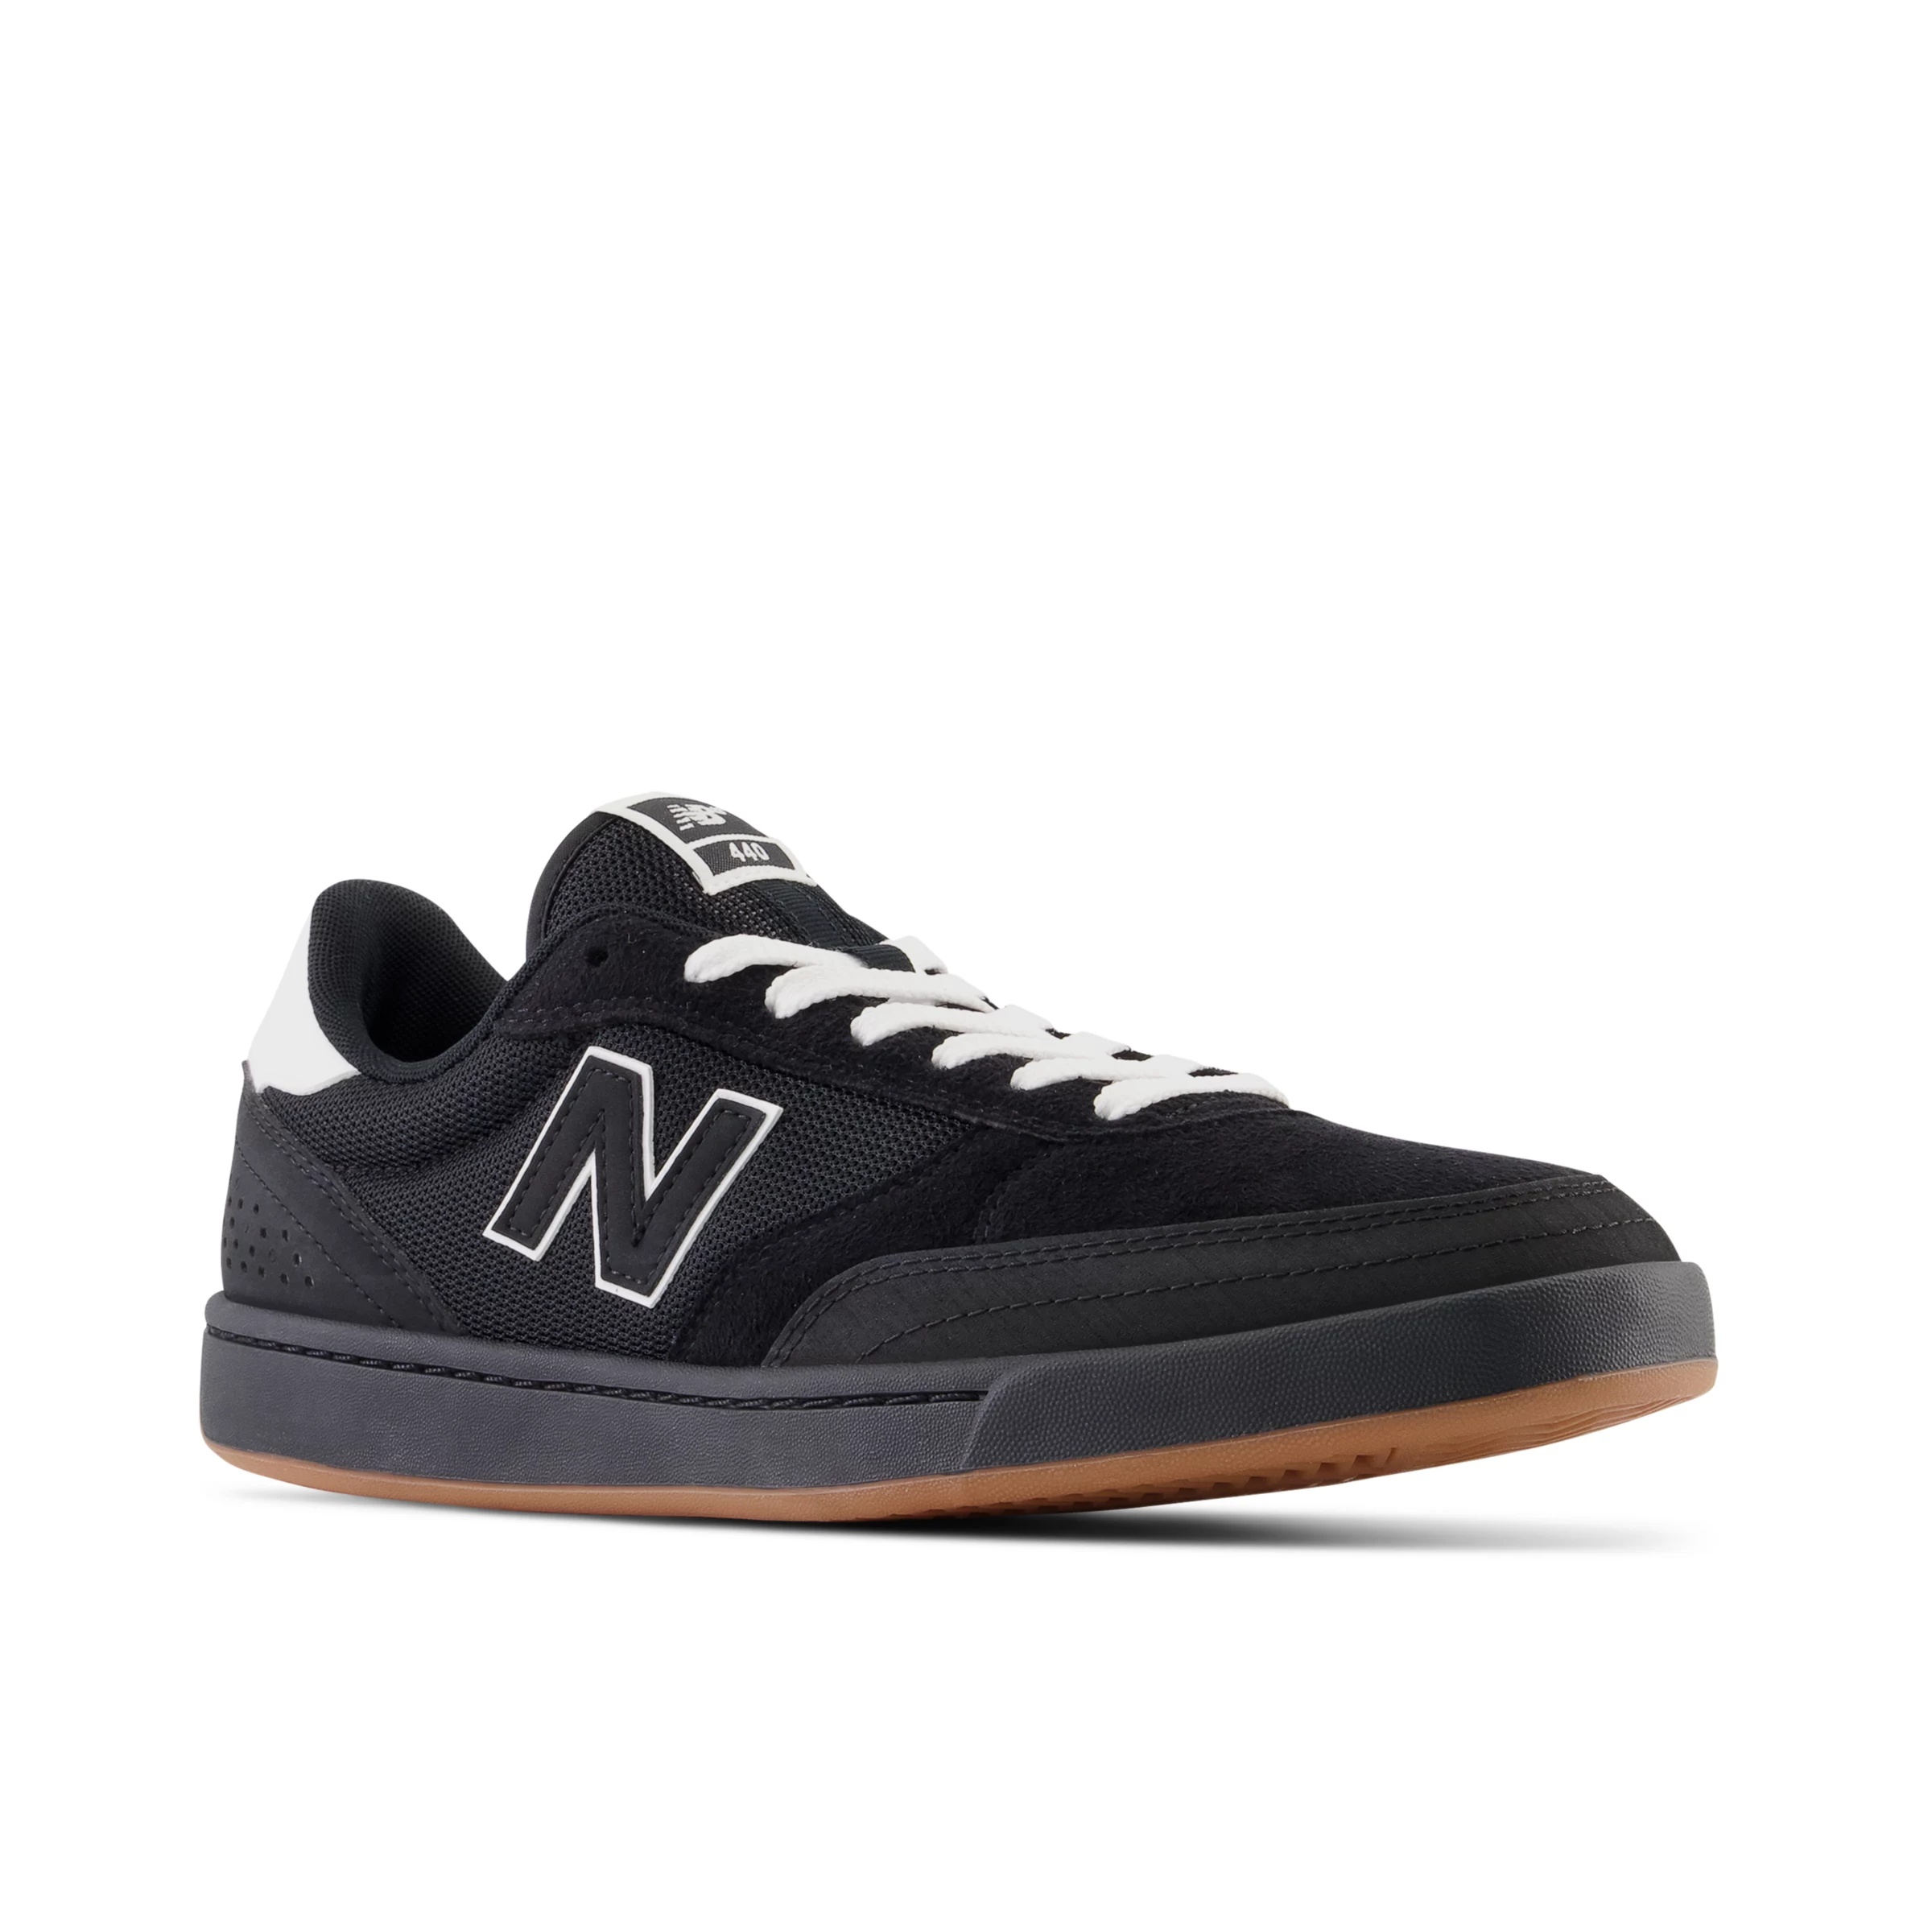 NB Numeric 440 Synthetic - 2